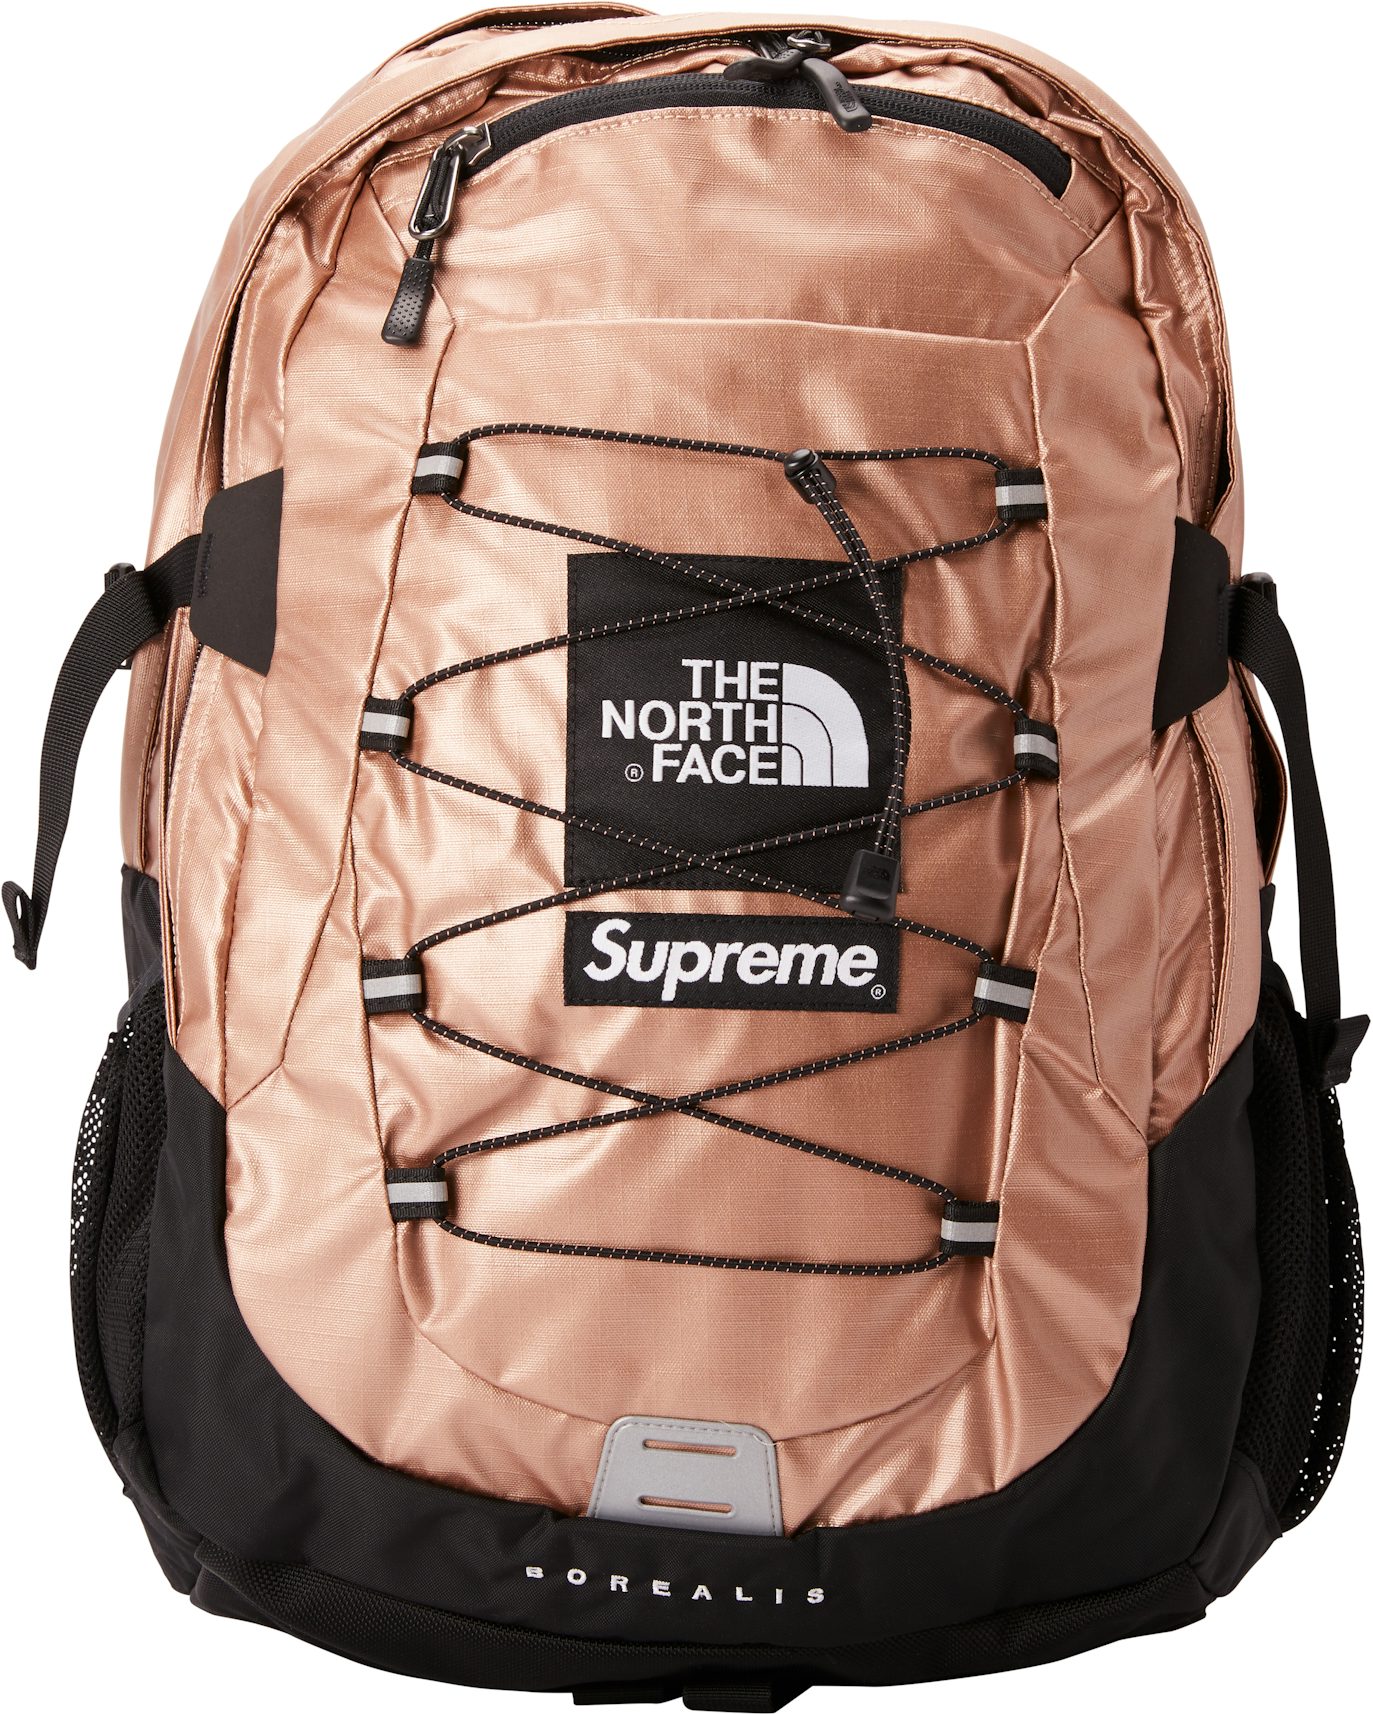 Supreme The North Face Printed Borealis Backpack Red - N/A – Izicop